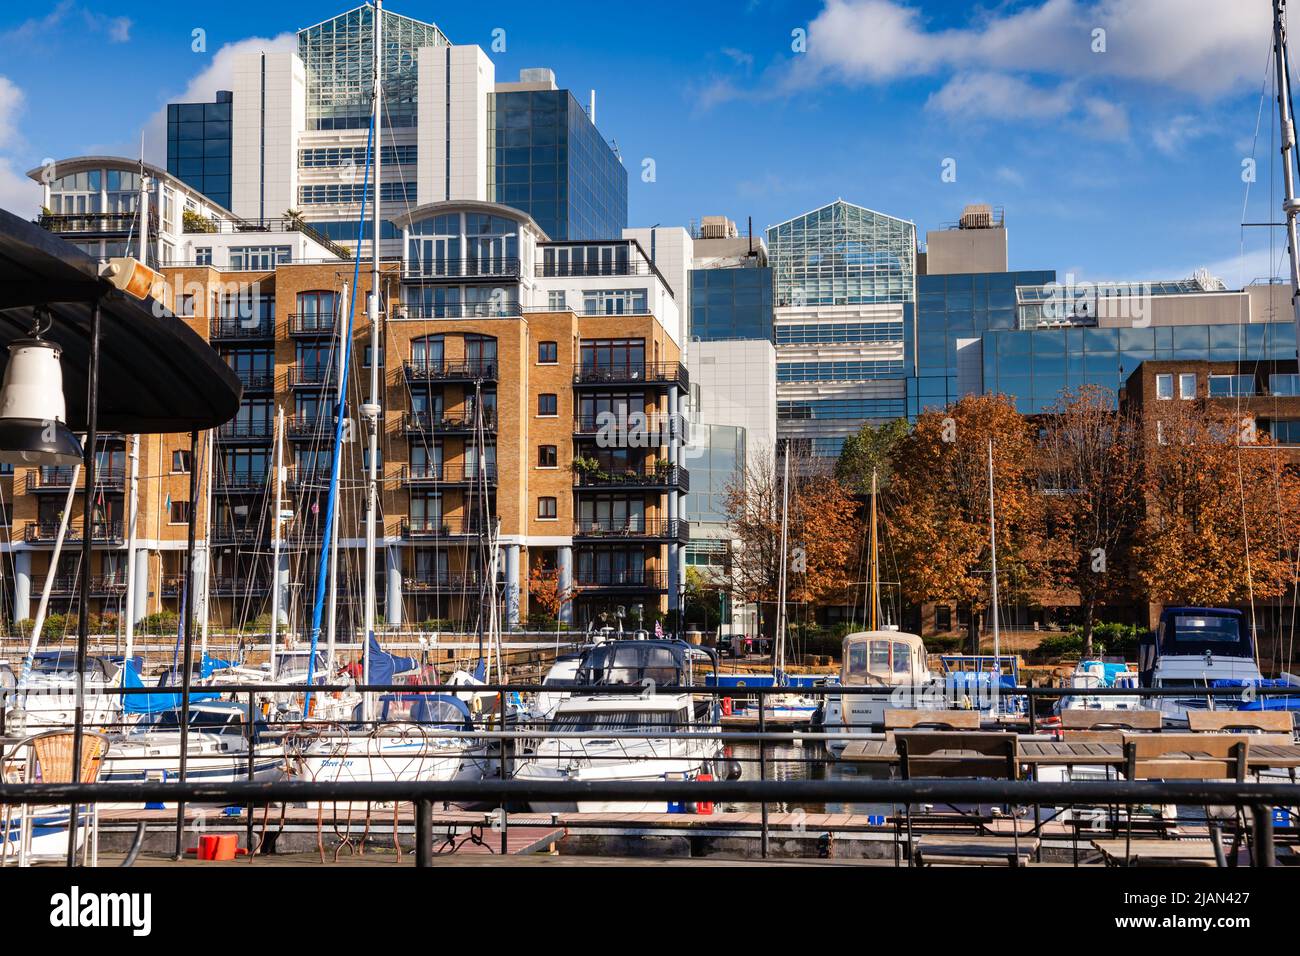 London, UK - Nov 1, 2012: Luxury waterside housing and leisure complex with yachting marina at the St Katharine Docks Stock Photo